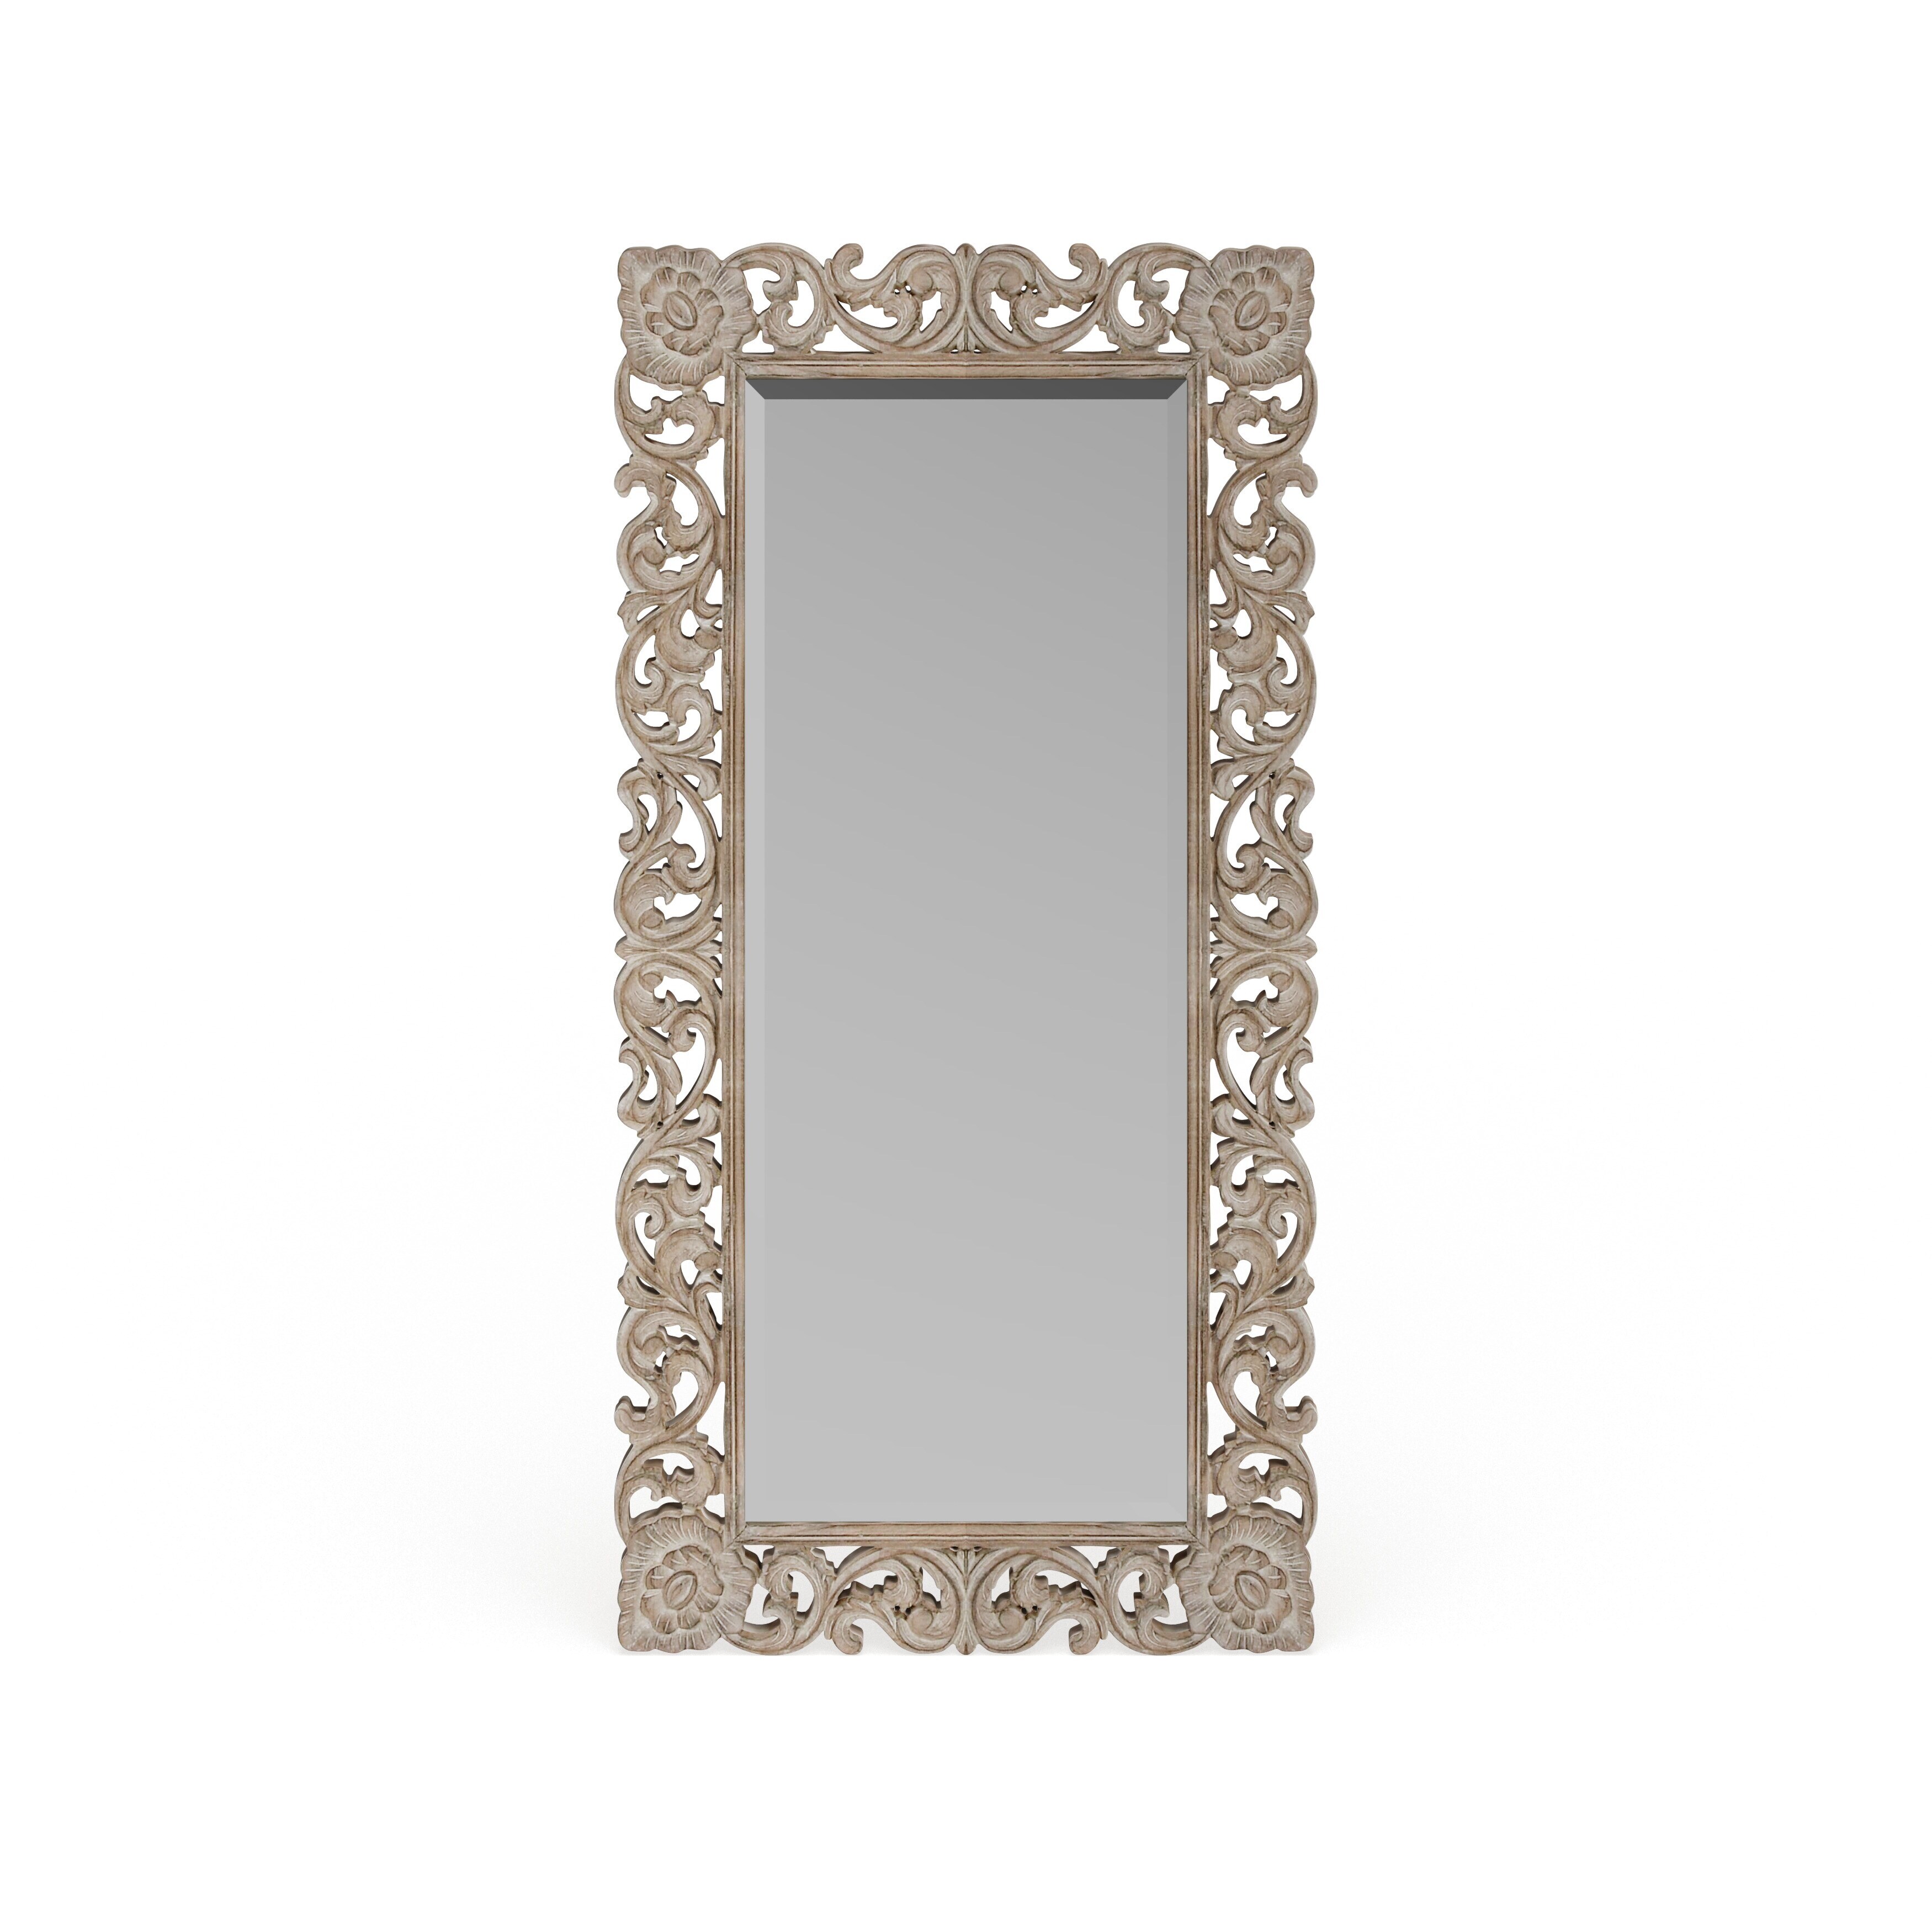 https://ak1.ostkcdn.com/images/products/is/images/direct/6c45191dedec3b3df16bb14cea025f5036915fa9/Light-Brown-Wood-Traditional-Wall-Mirror.jpg